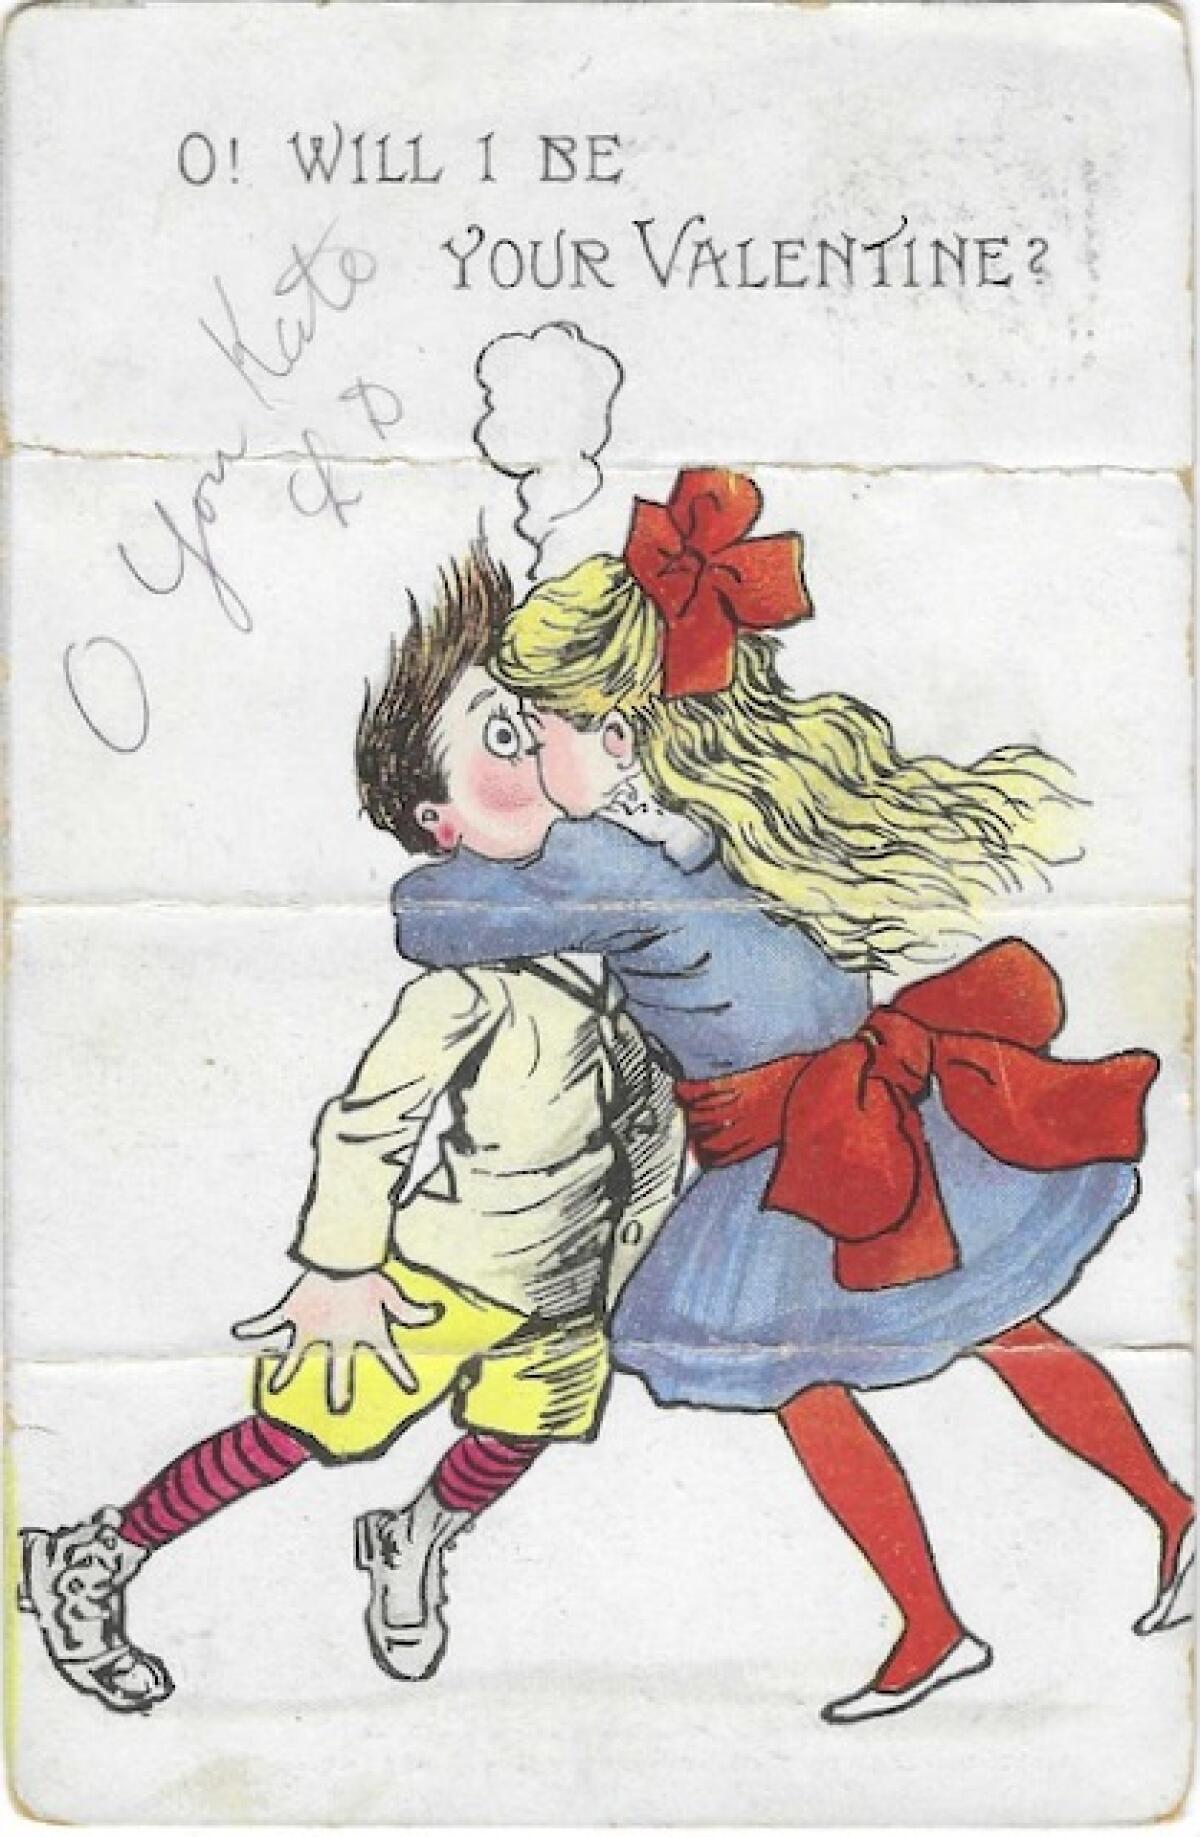 A girl with blond locks kisses an unsuspecting boy. Someone has written on the card: "O you Kate."